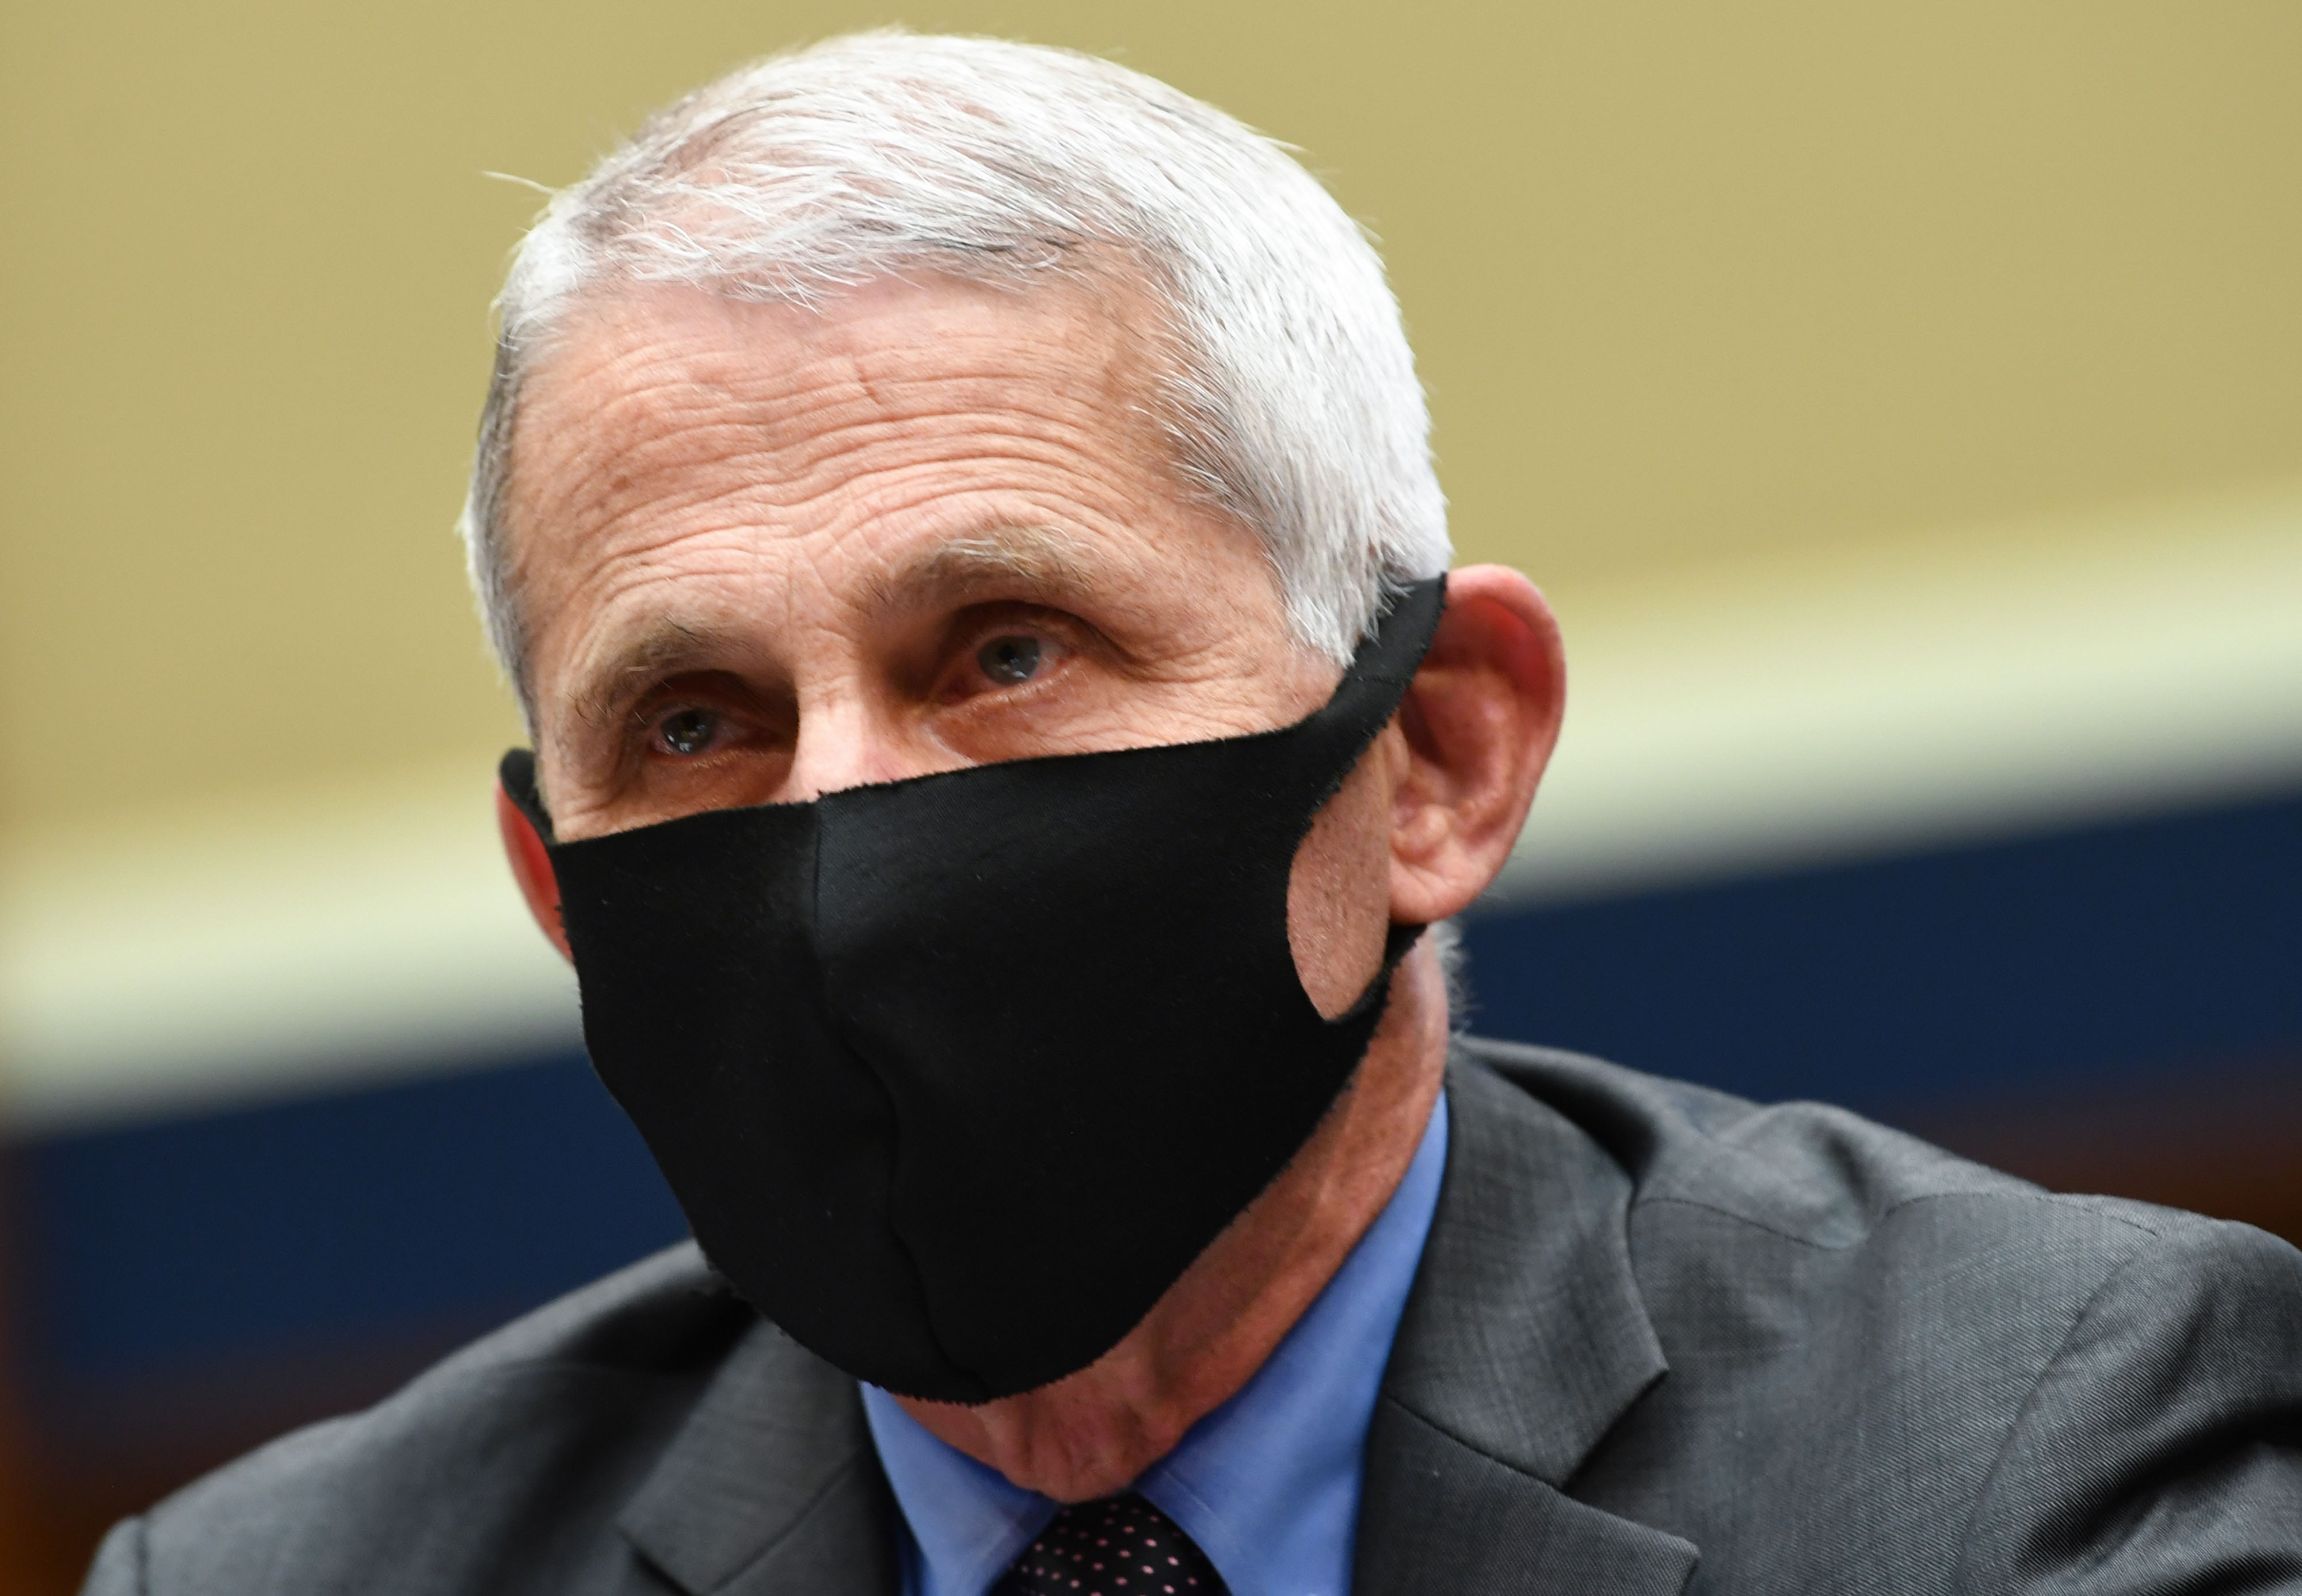 Dr. Anthony Fauci, the United States' top infectious disease expert, testifies at a hearing in Washington, DC, on June 23.